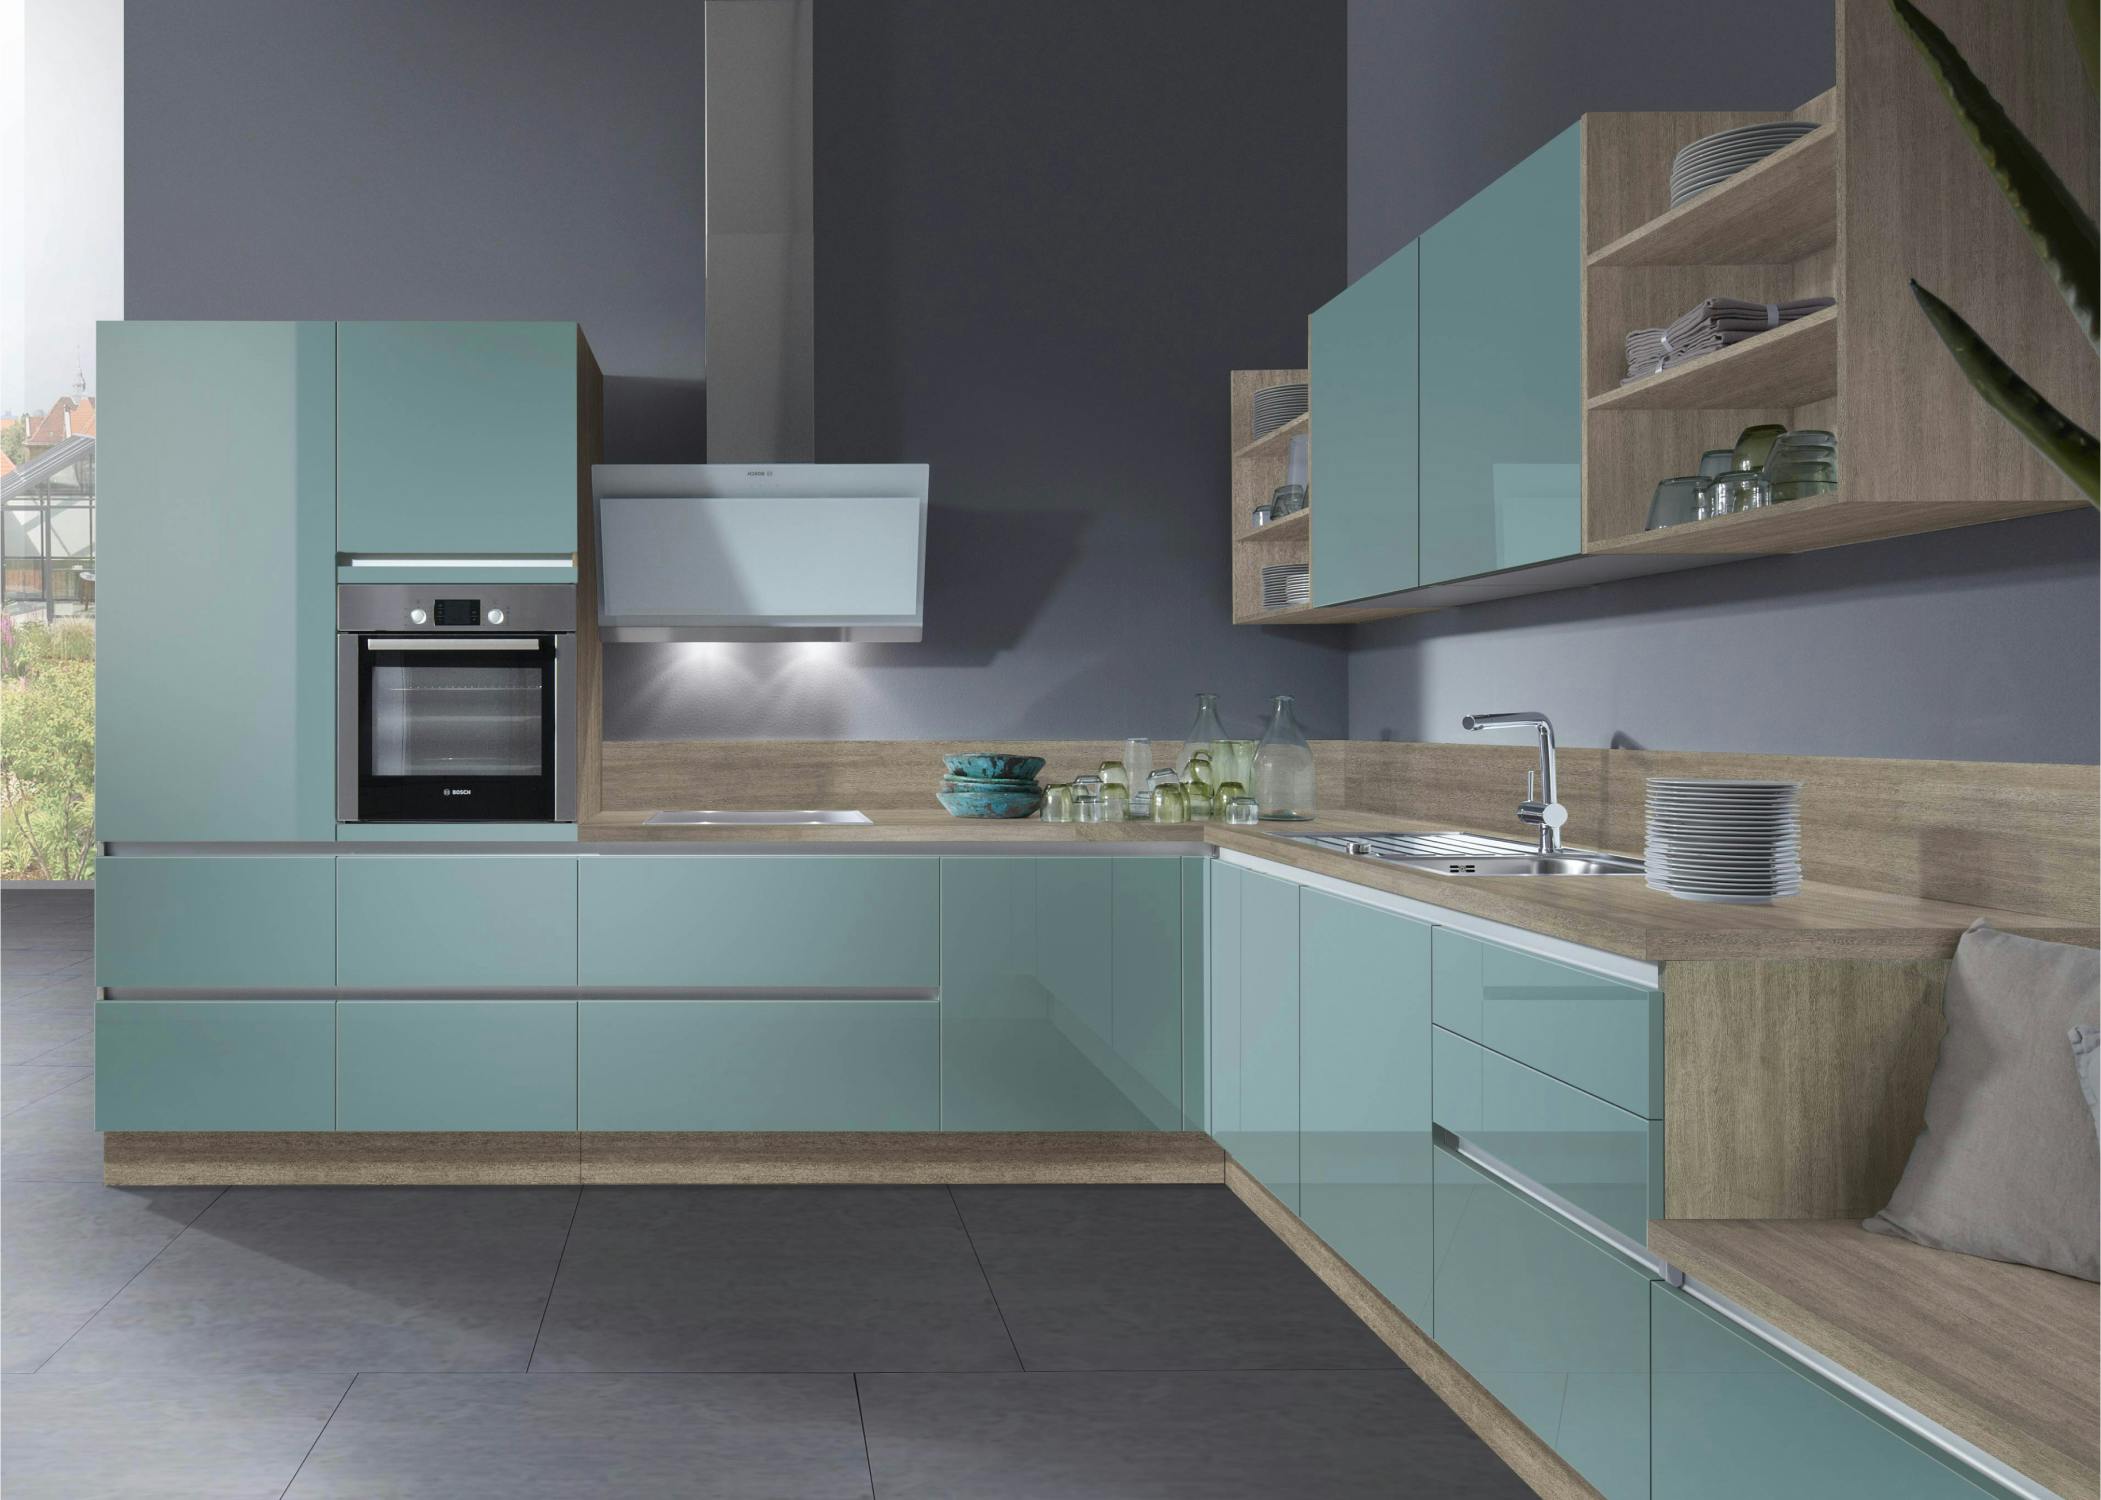 kitchen image modern design with lights and elegant design pvc wood and cyan color with oven and microwave with a lot of space